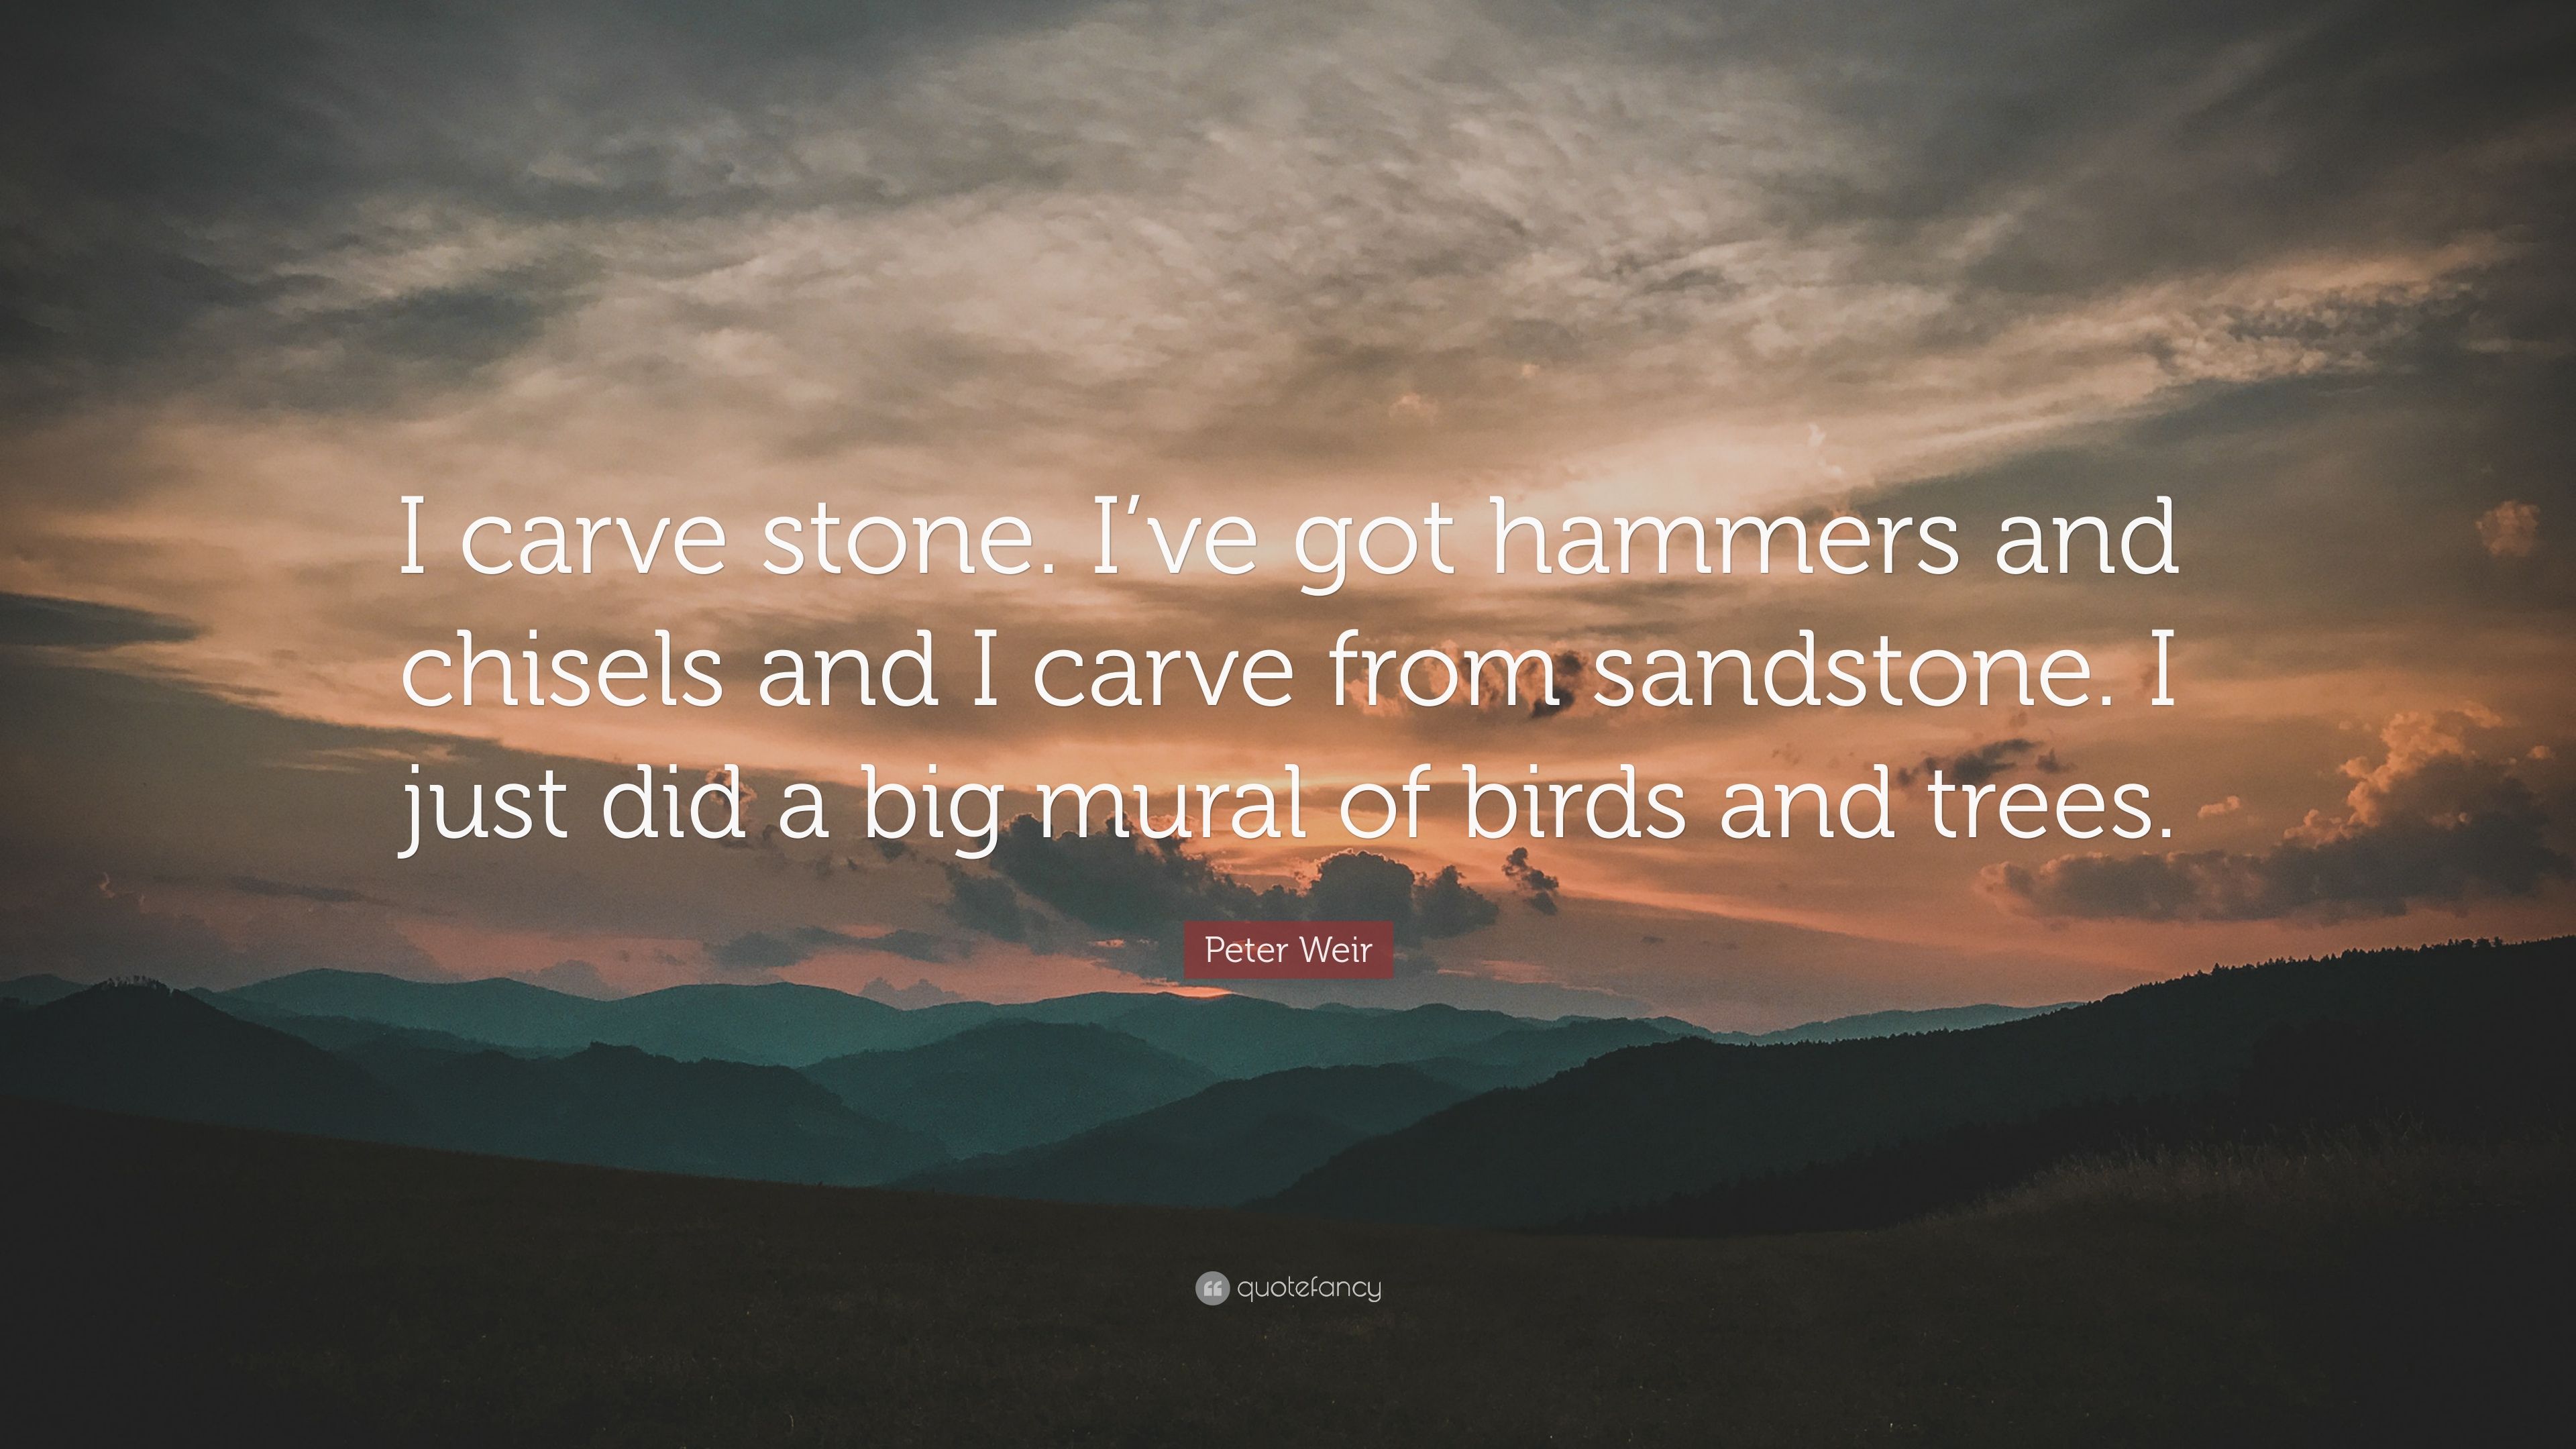 Peter weir quote âi carve stone ive got hammers and chisels and i carve from